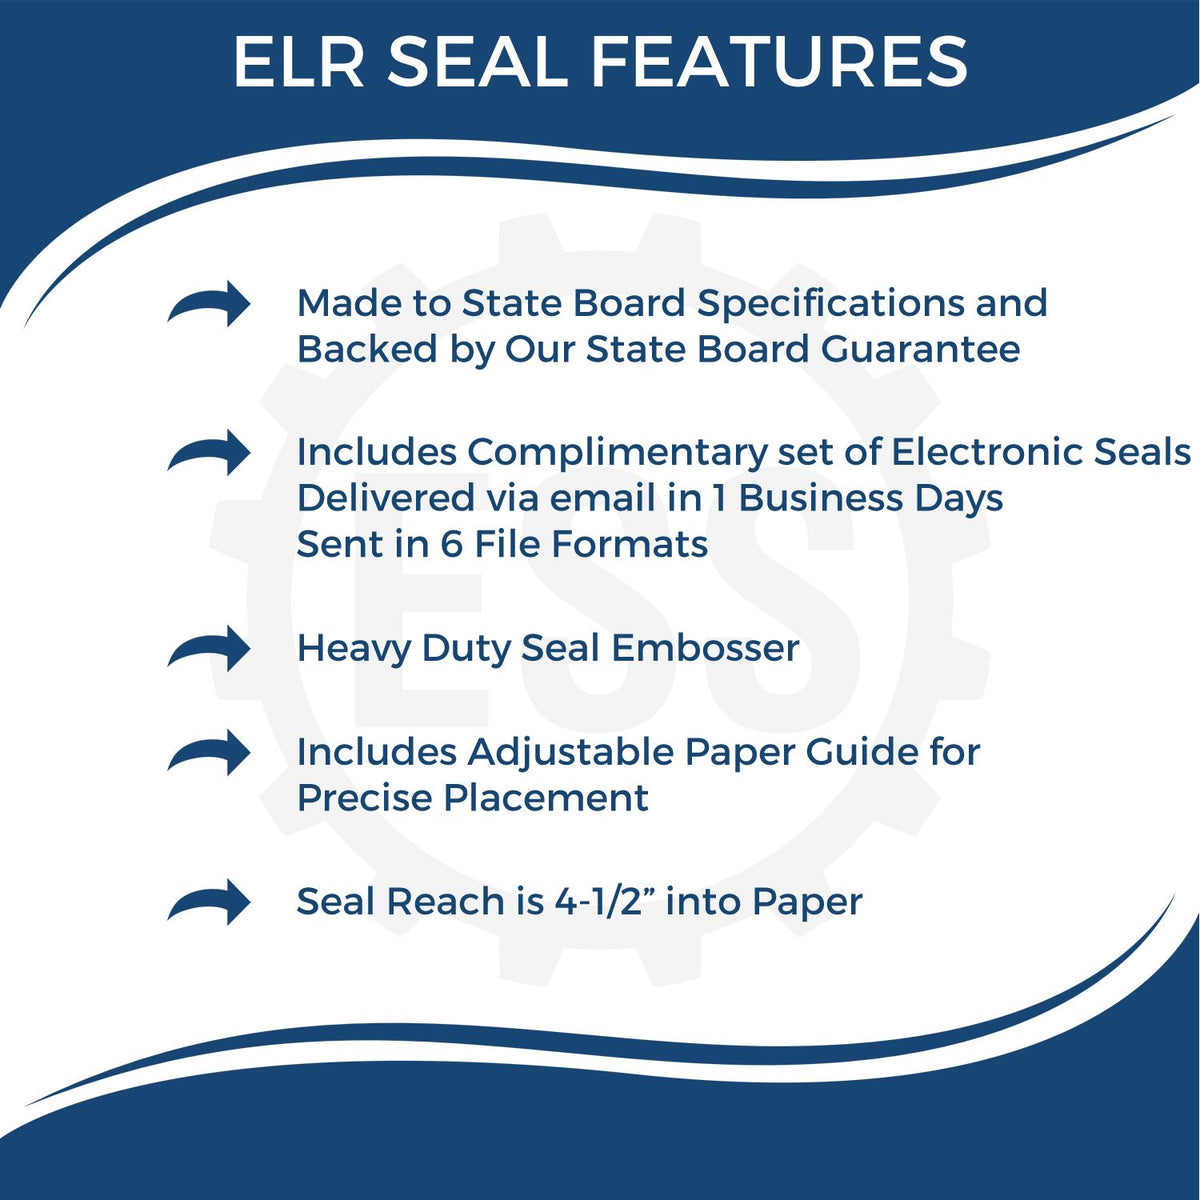 A picture of an infographic highlighting the selling points for the State of Utah Extended Long Reach Geologist Seal